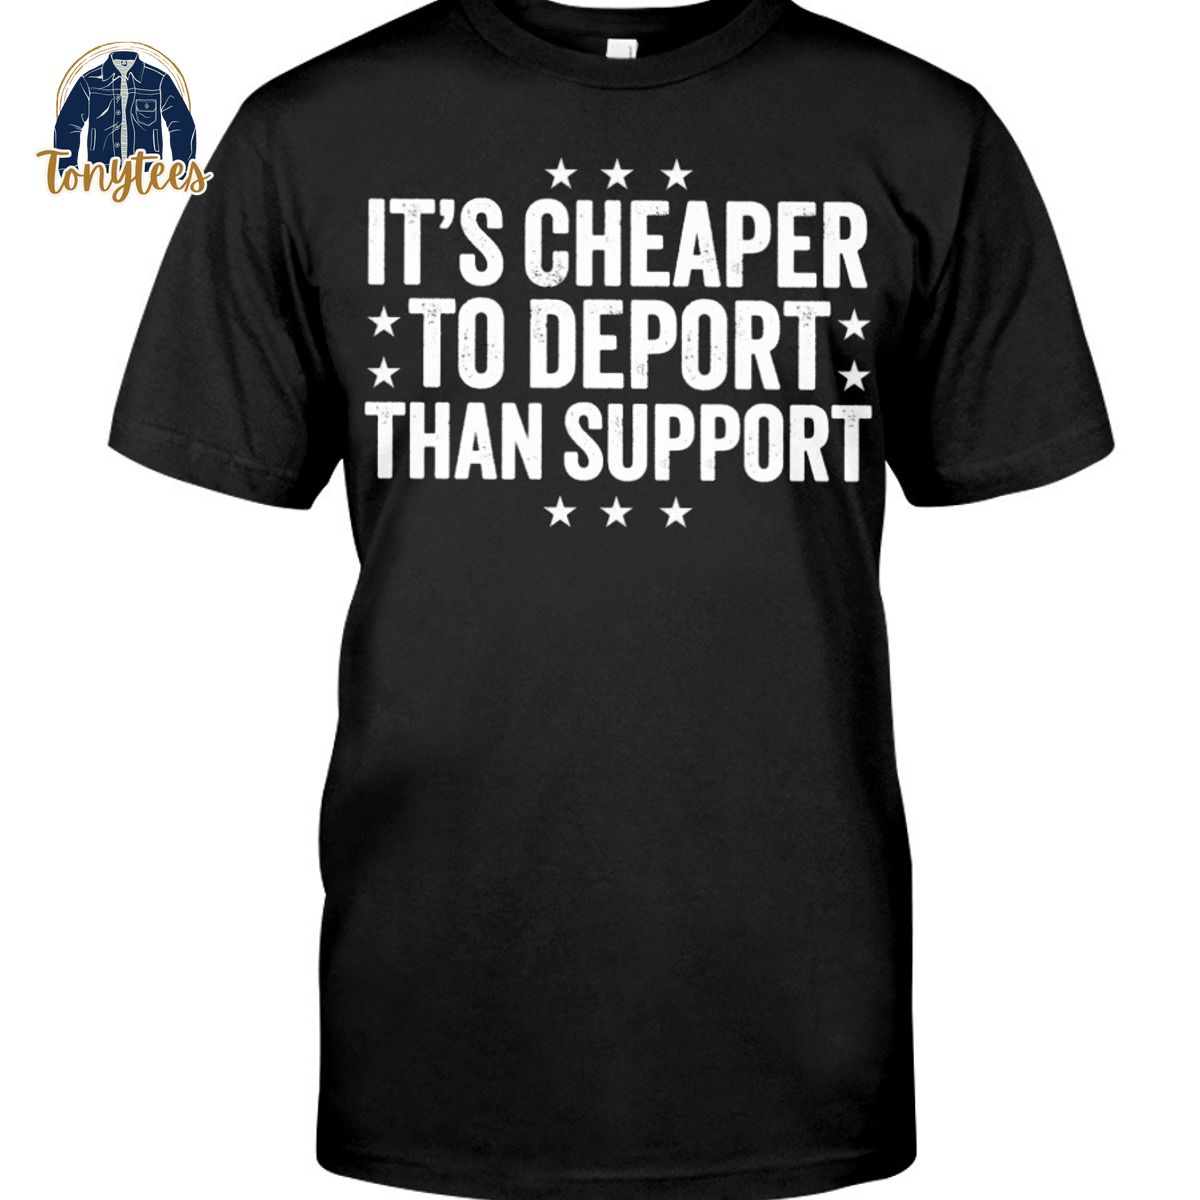 It’s cheaper tp deport than support shirt